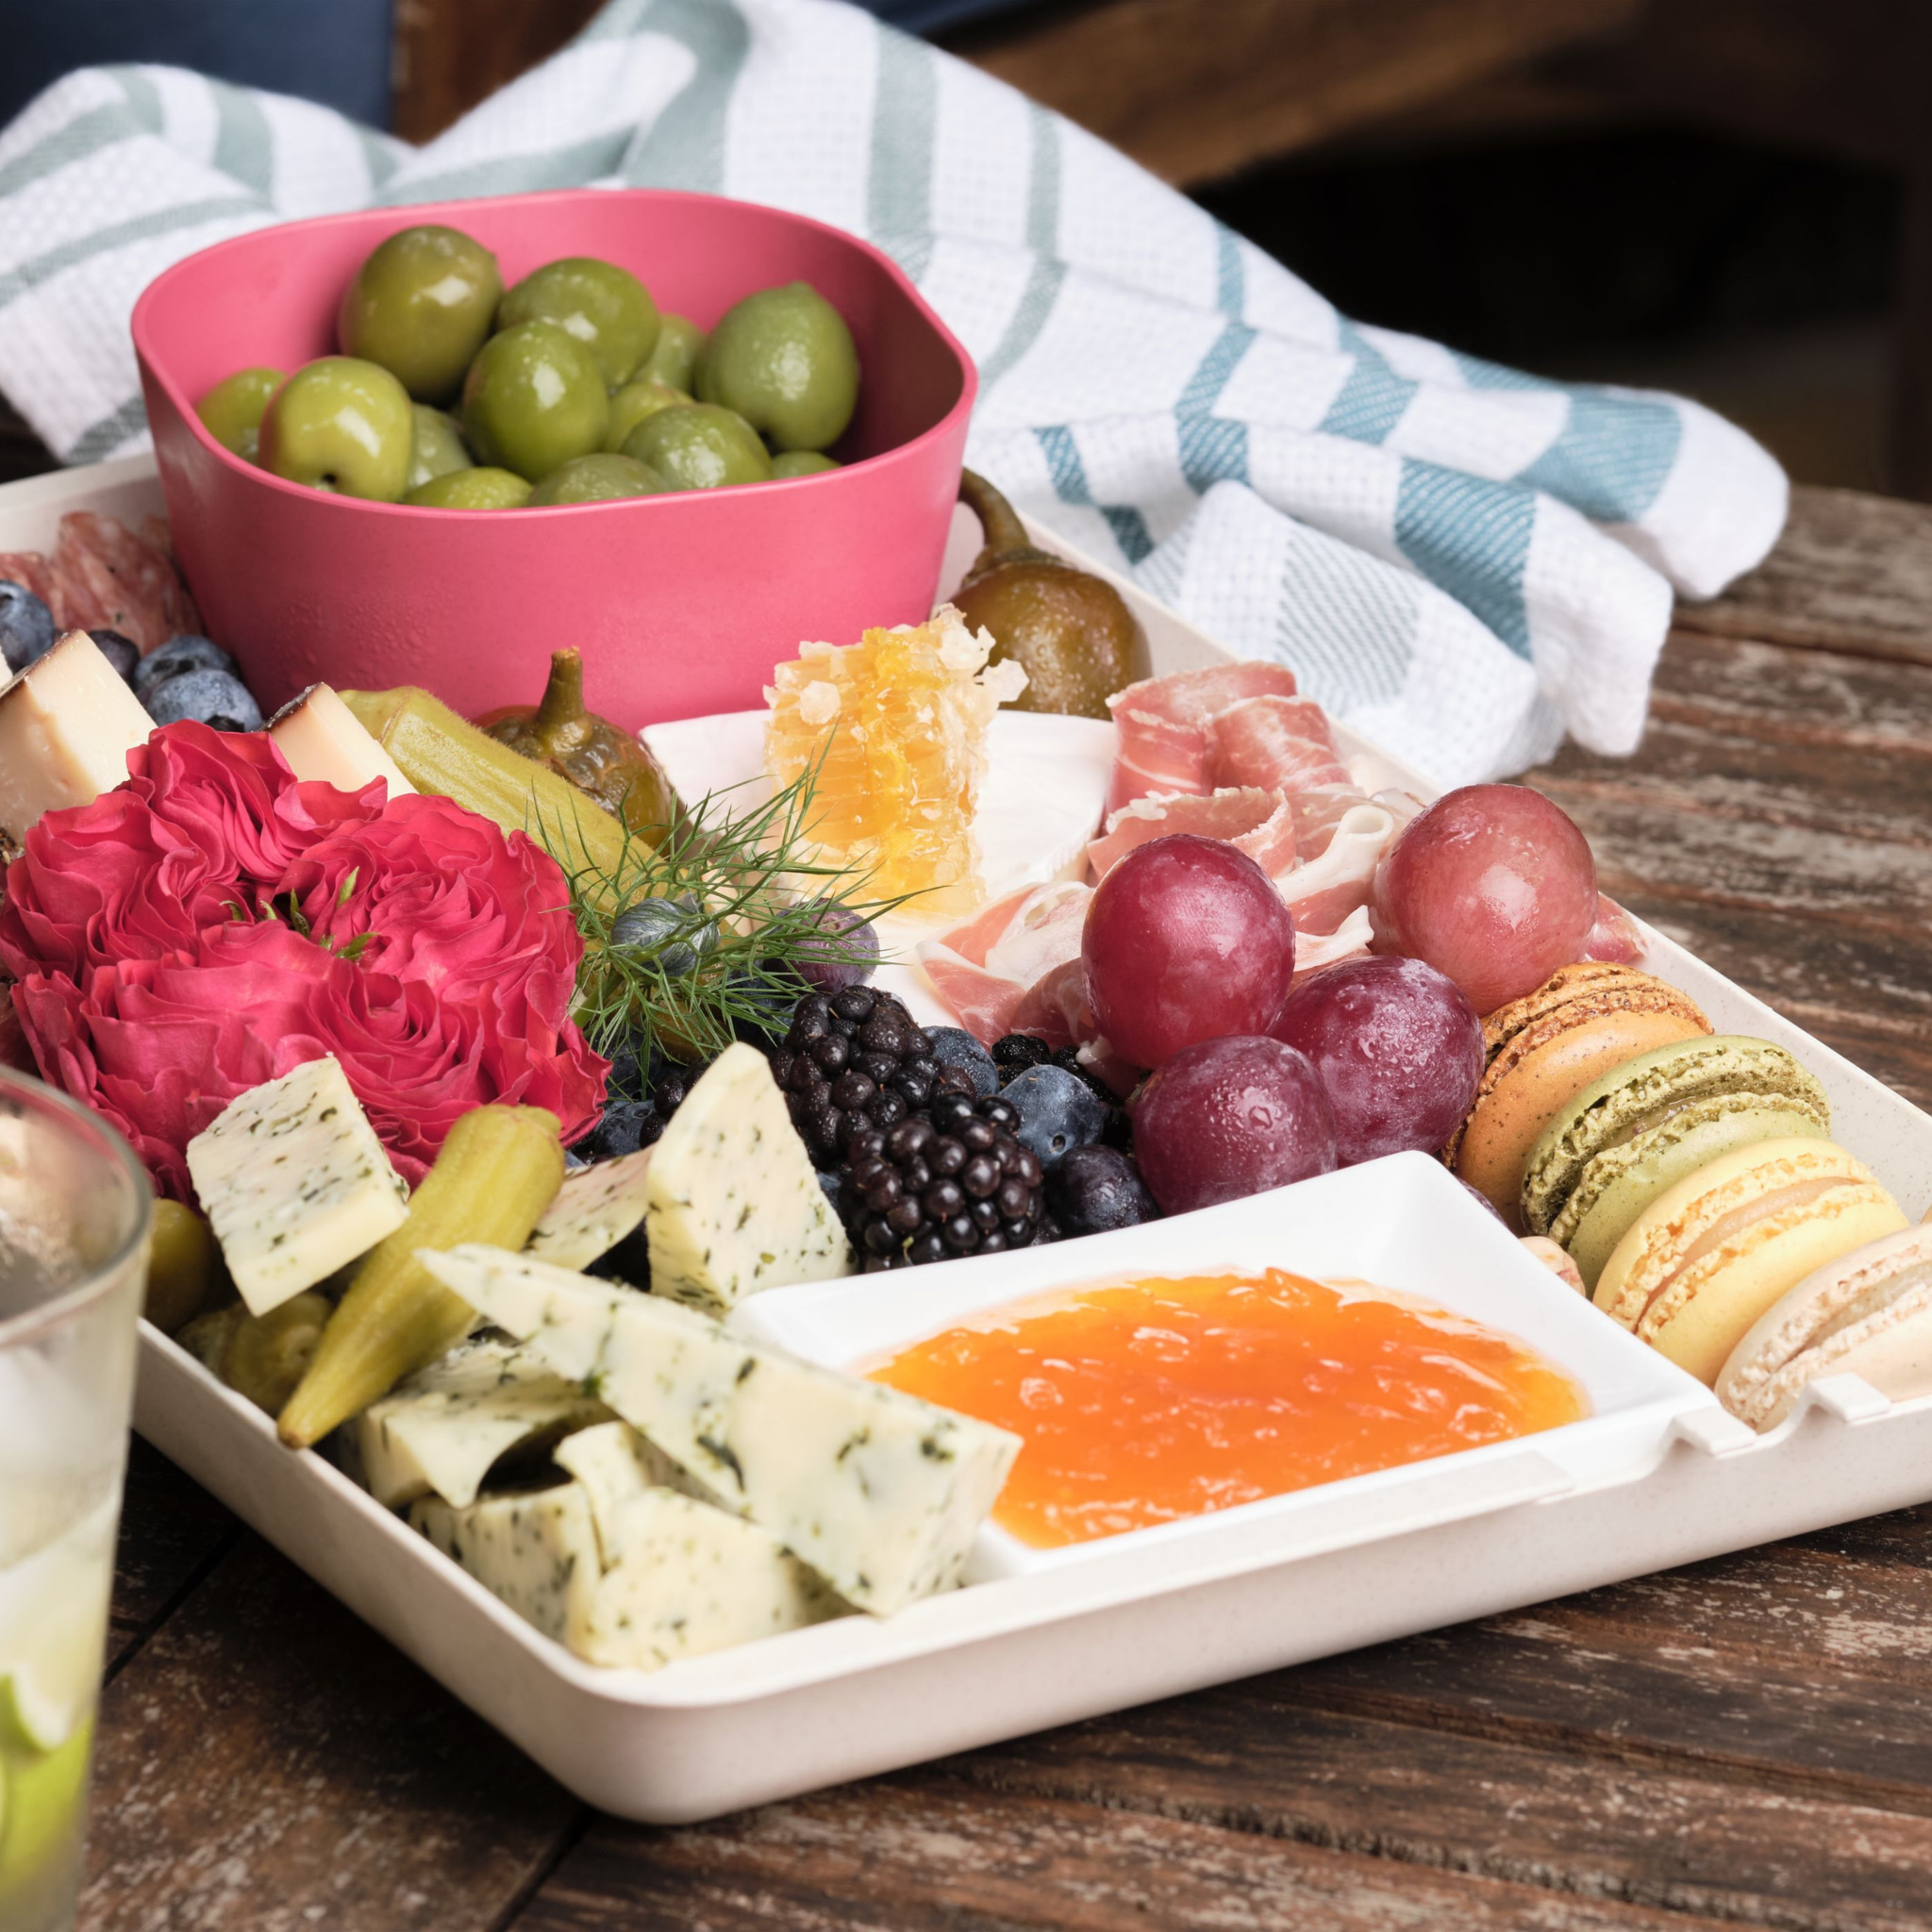 Ditch disposables, cook sustainably! Bamboozle X Elizabeth Karmel Prep 'n Serve Tray Set (large tray, medium tray, 6 prep cups). Eco-friendly, colorful, organized cooking. Shop Bamboozle Home now!